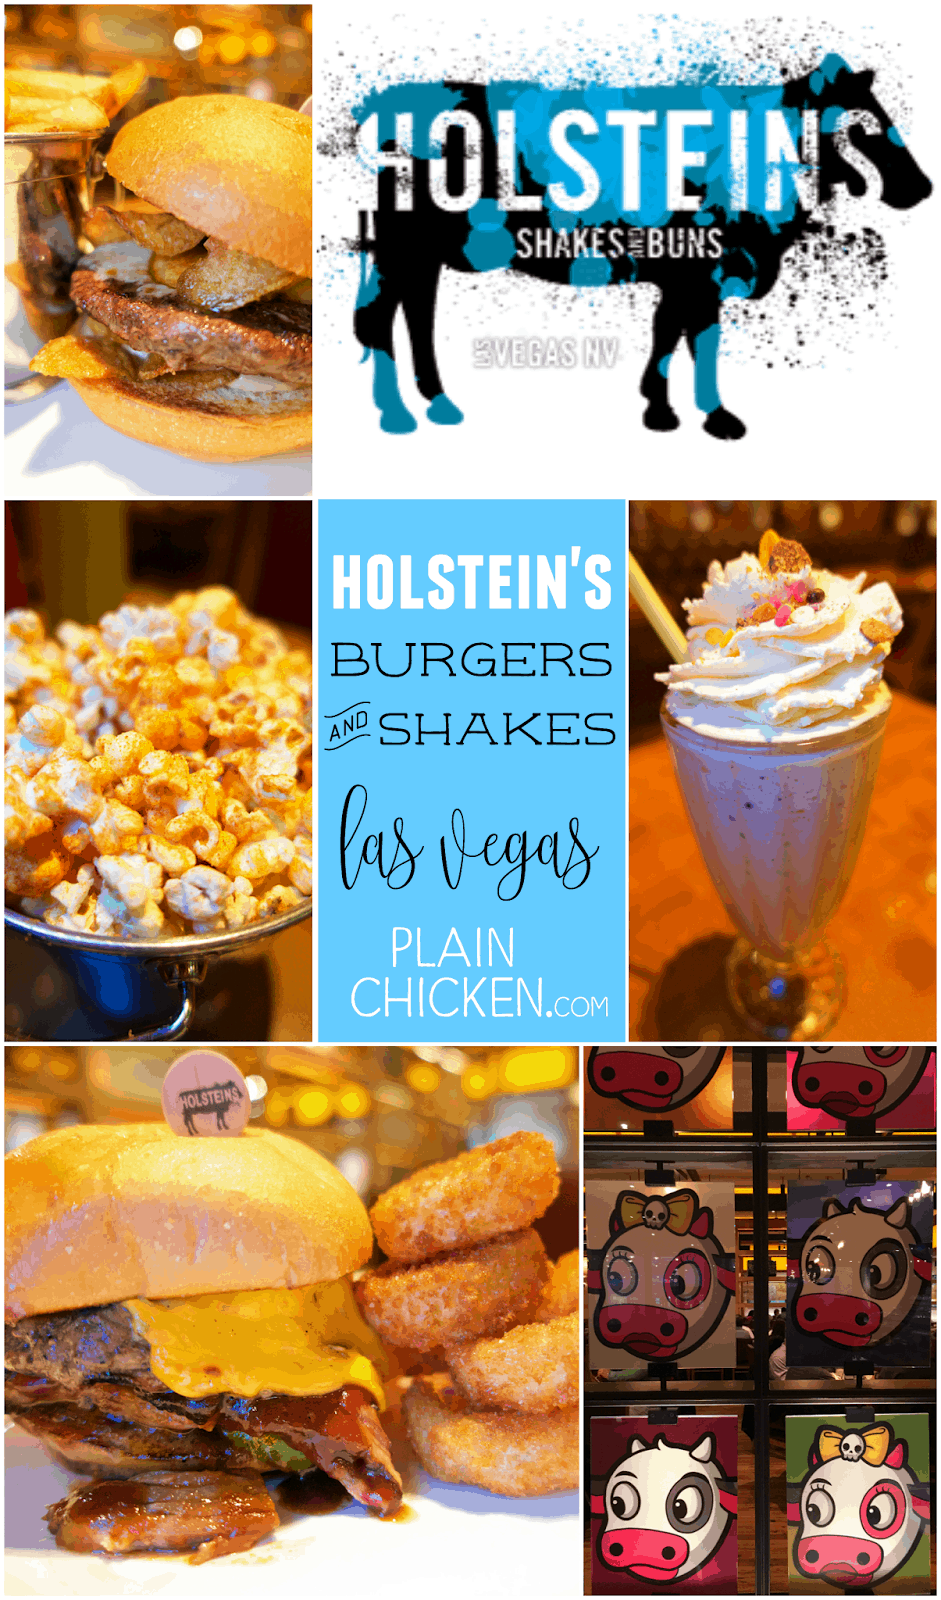 Holstein's Burgers {Las Vegas} - great burgers and shakes on the Las Vegas strip! Located on the second level at the Cosmopolitan hotel and casino. A must if you are in Vegas.